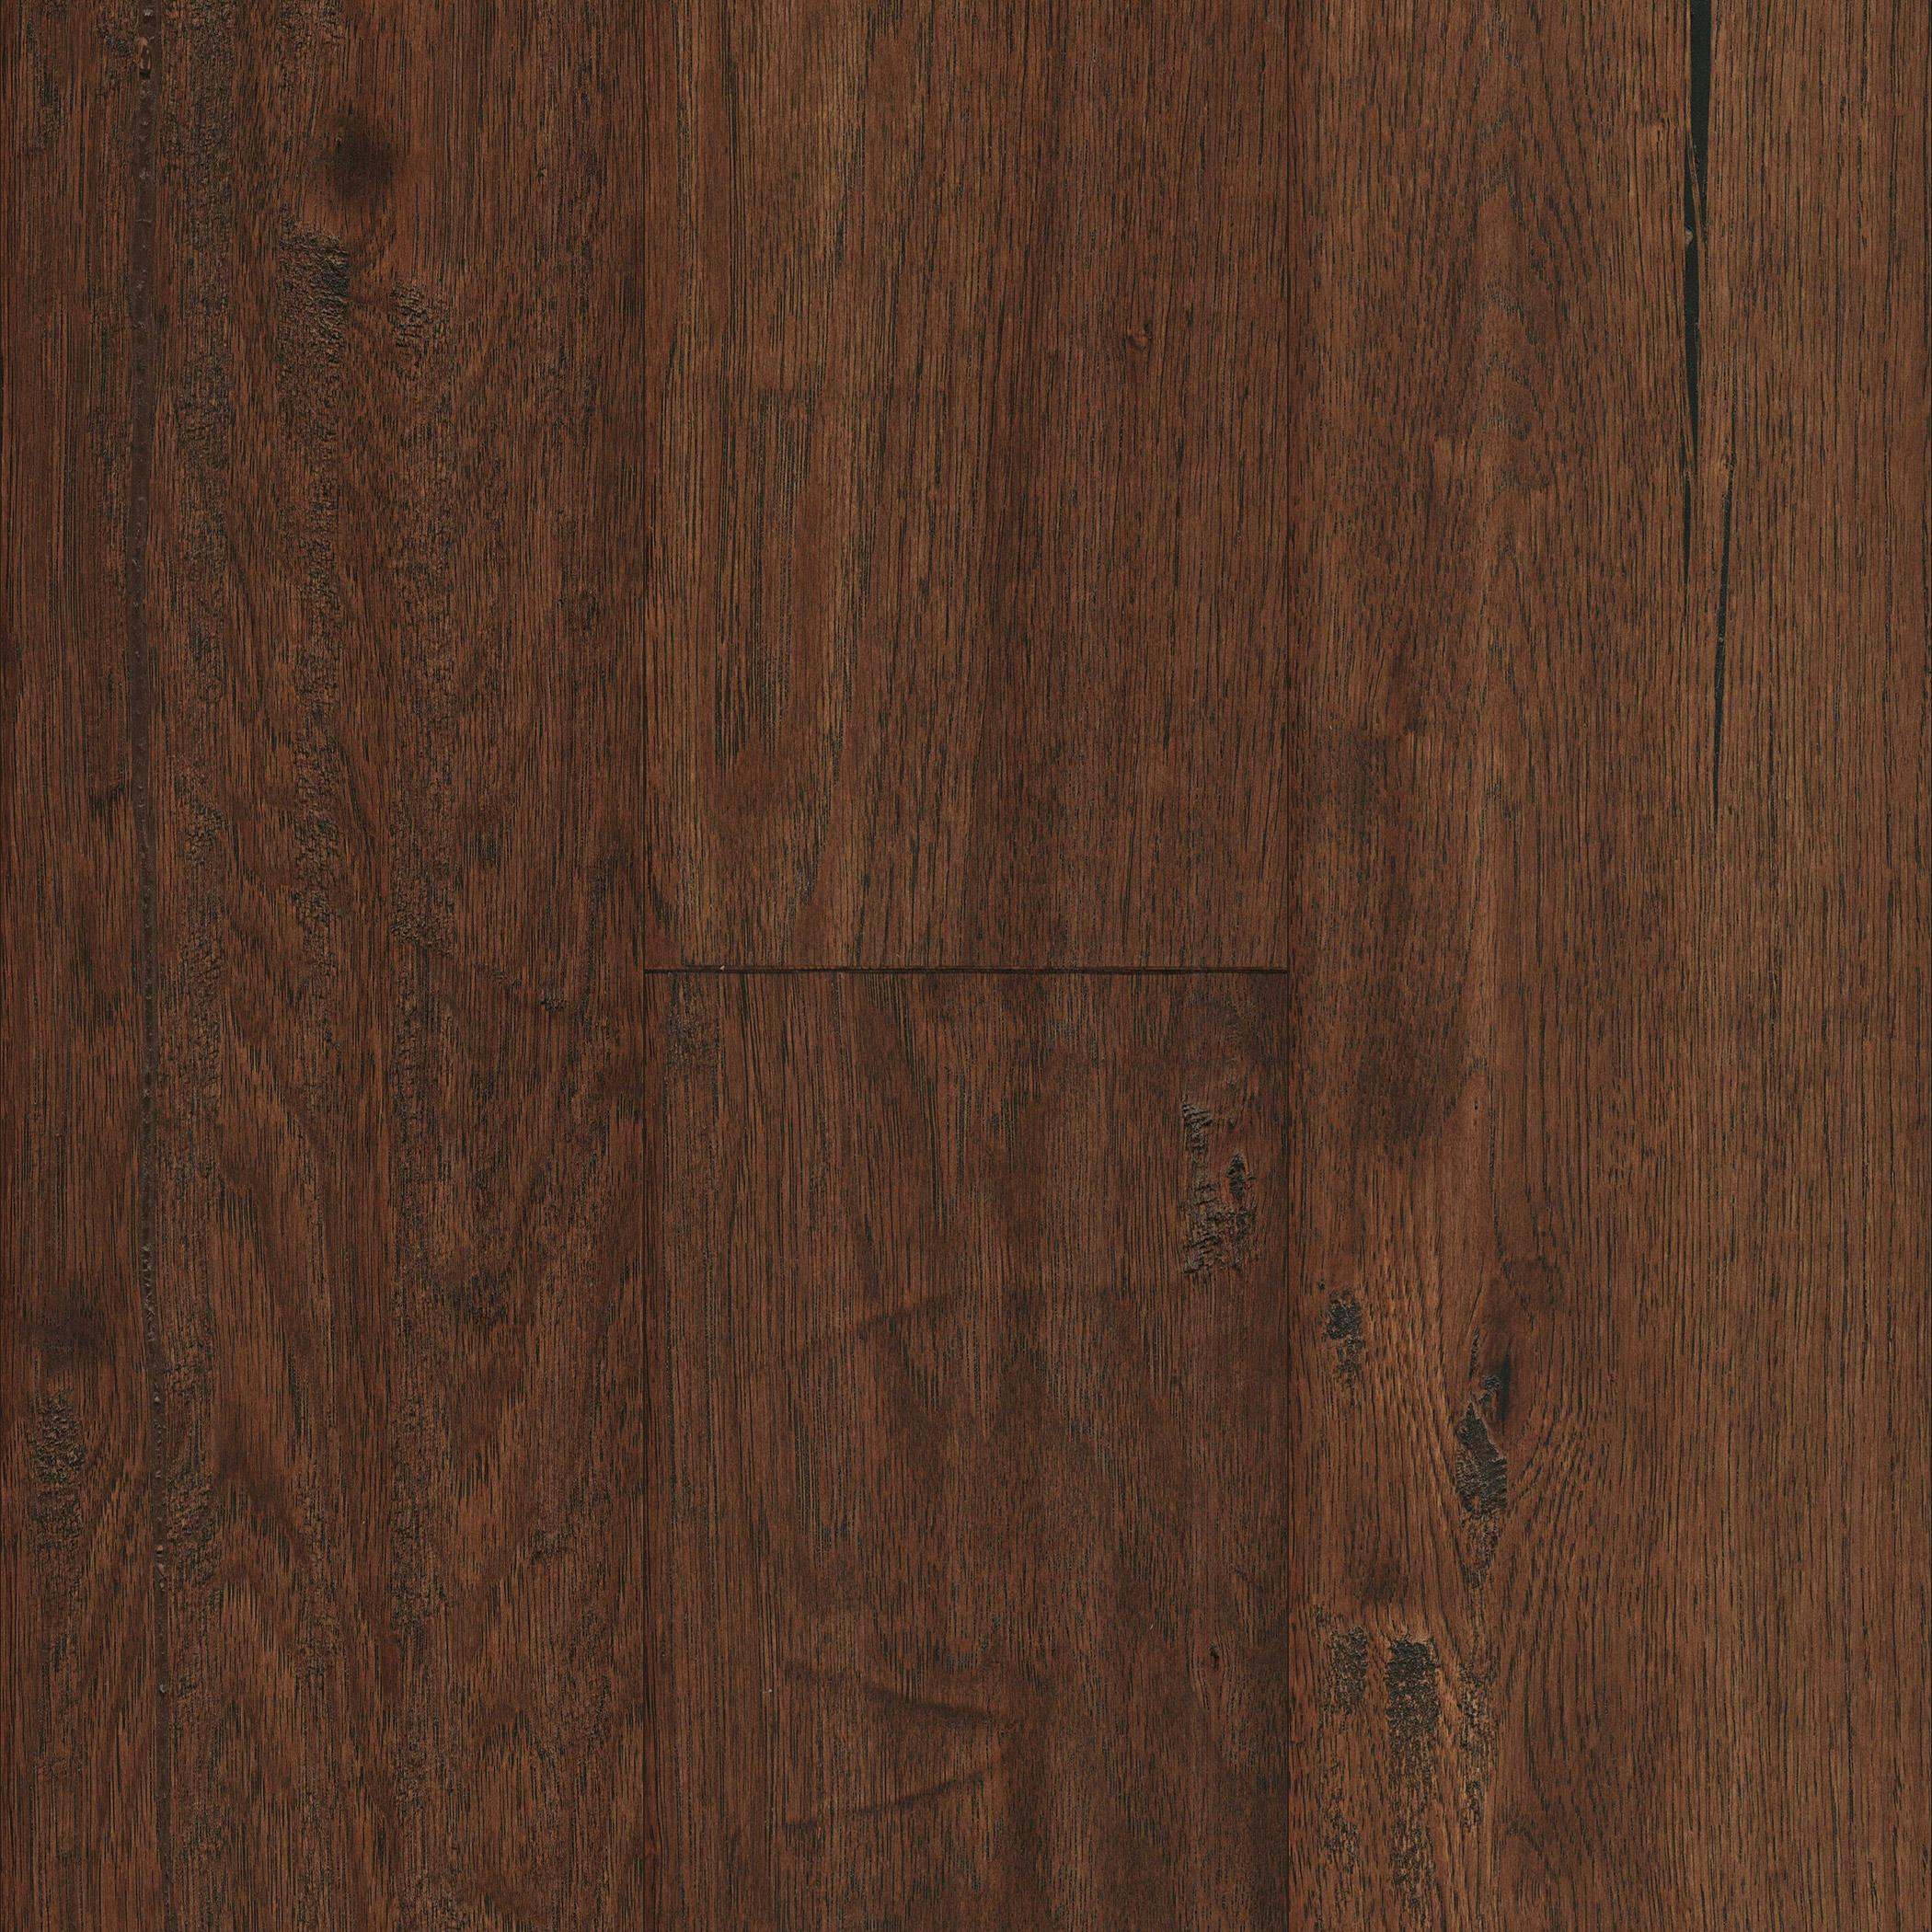 13 Stylish Bruce Hardwood Floor Cleaner Reviews 2024 free download bruce hardwood floor cleaner reviews of mullican san marco hickory provincial 7 sculpted engineered intended for mullican san marco hickory provincial 7 sculpted engineered hardwood flooring